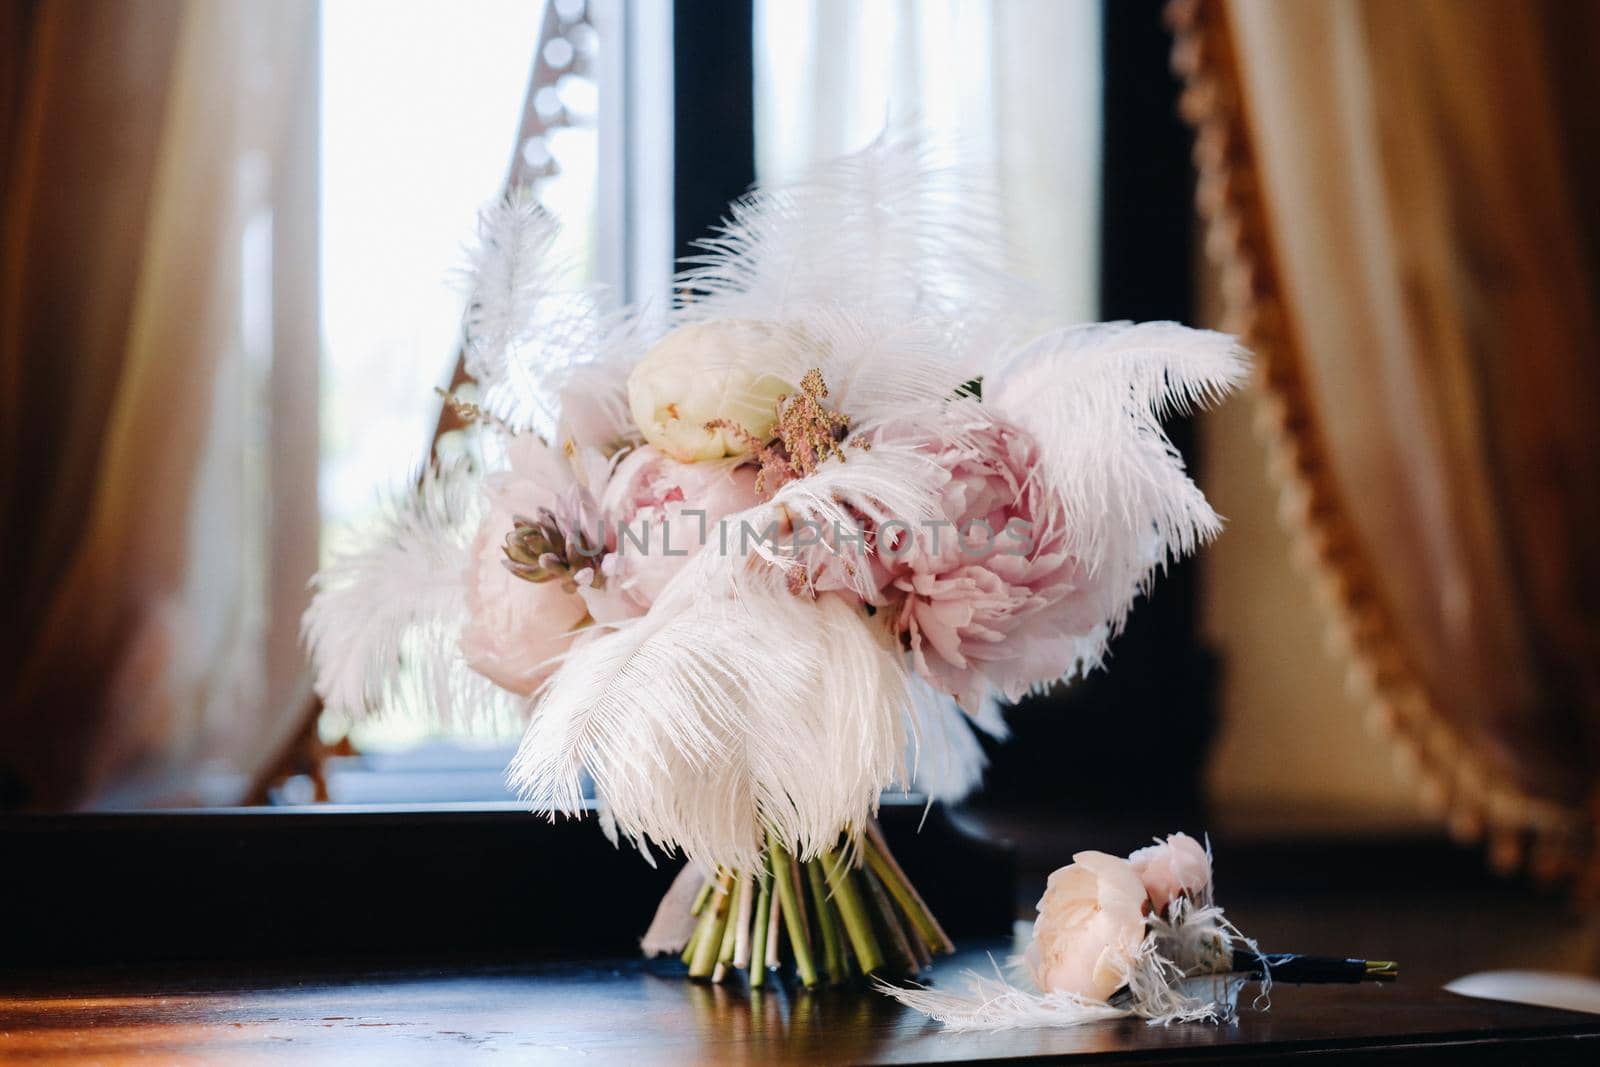 The bride's wedding bouquet of roses decorated with white feathers and a boutonniere by Lobachad